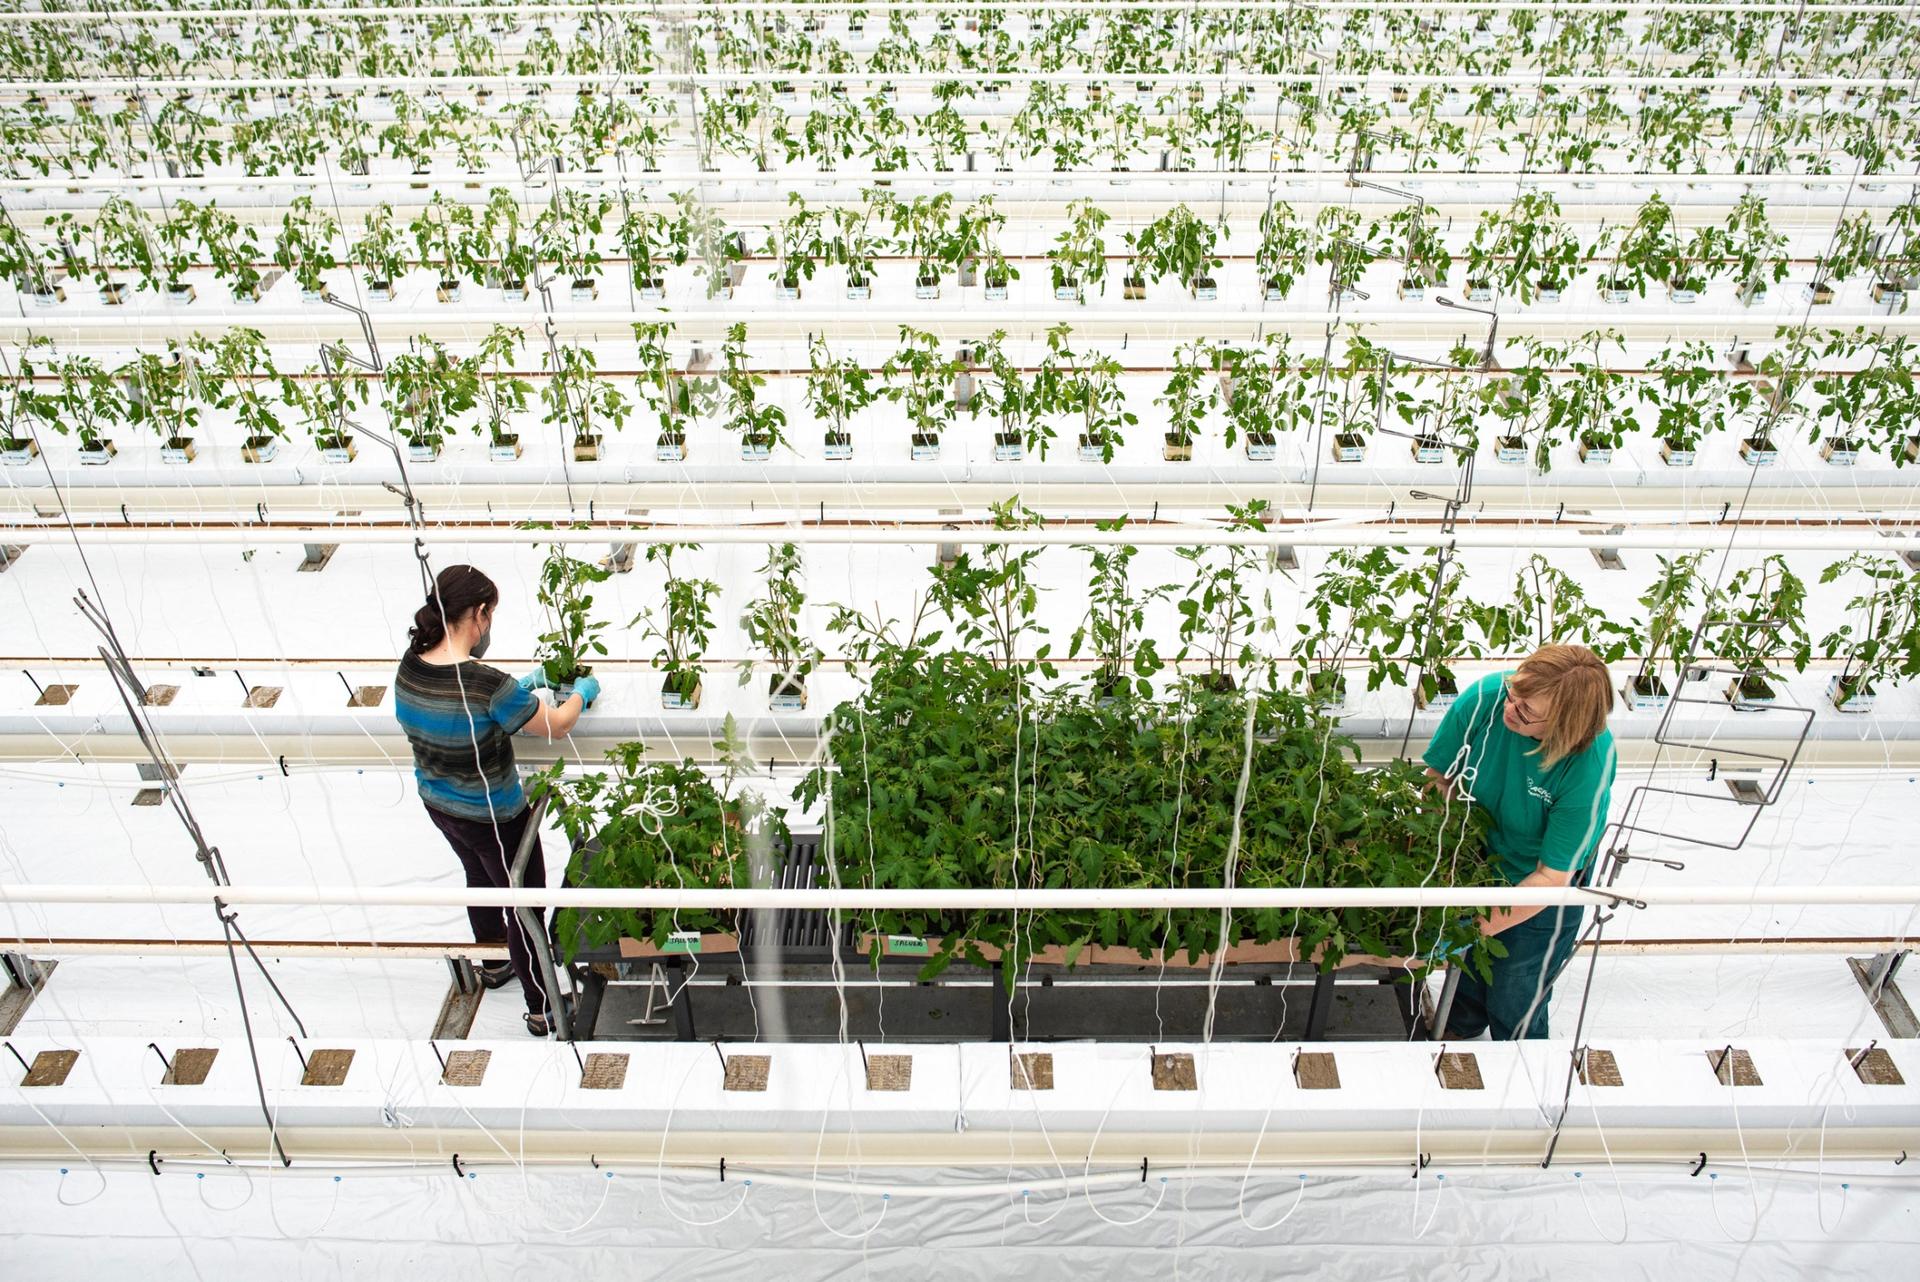 Hydroponic vegetables grow in long troughs year round inside greenhouses at Ráječek Farm in the Czech Republic. 